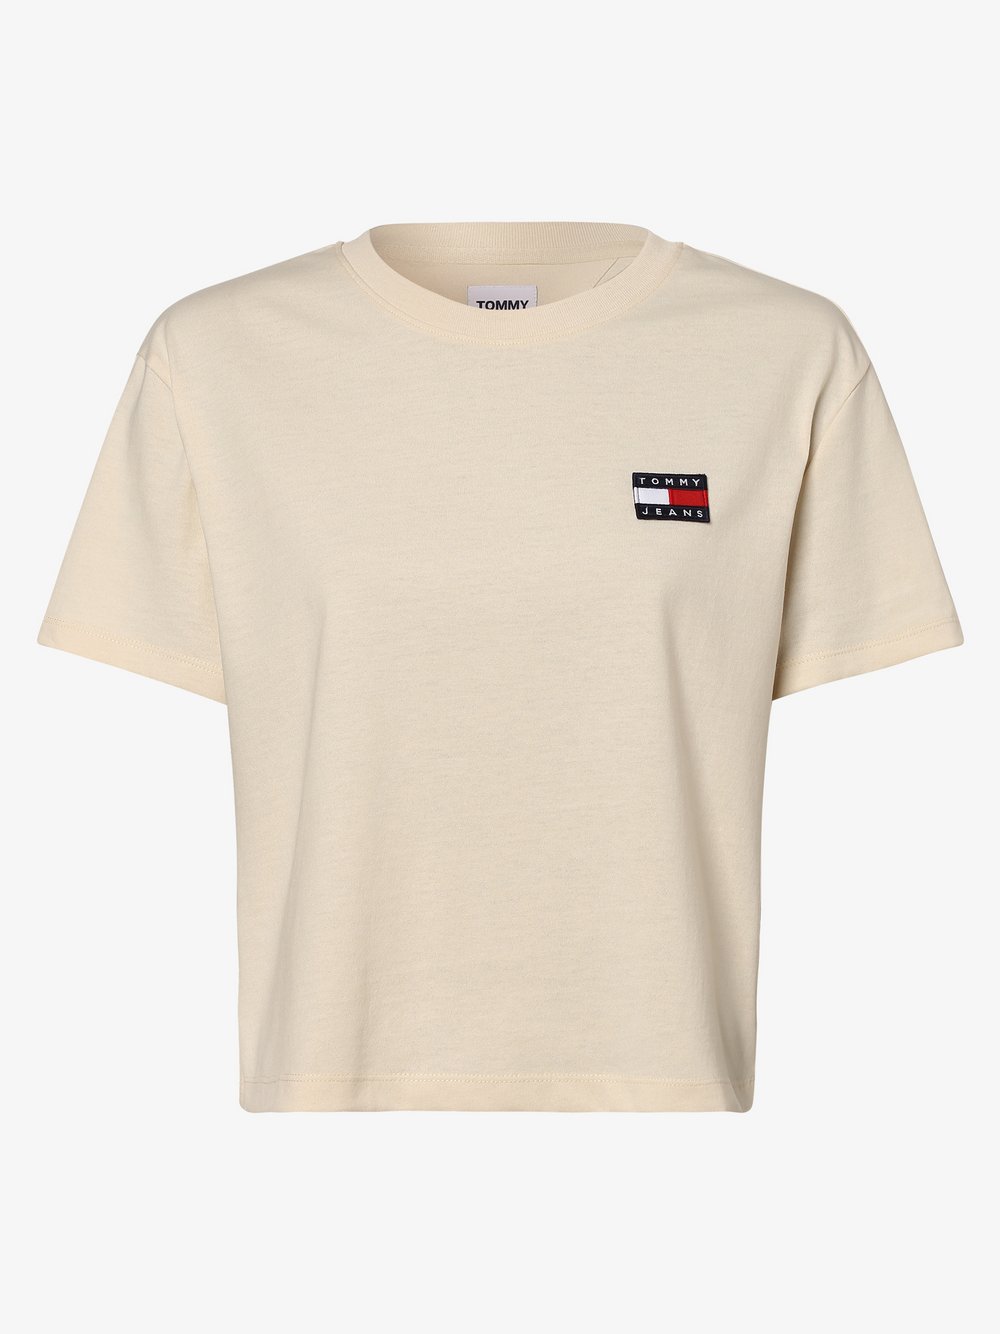 Tommy Jeans - T-shirt, beżowy